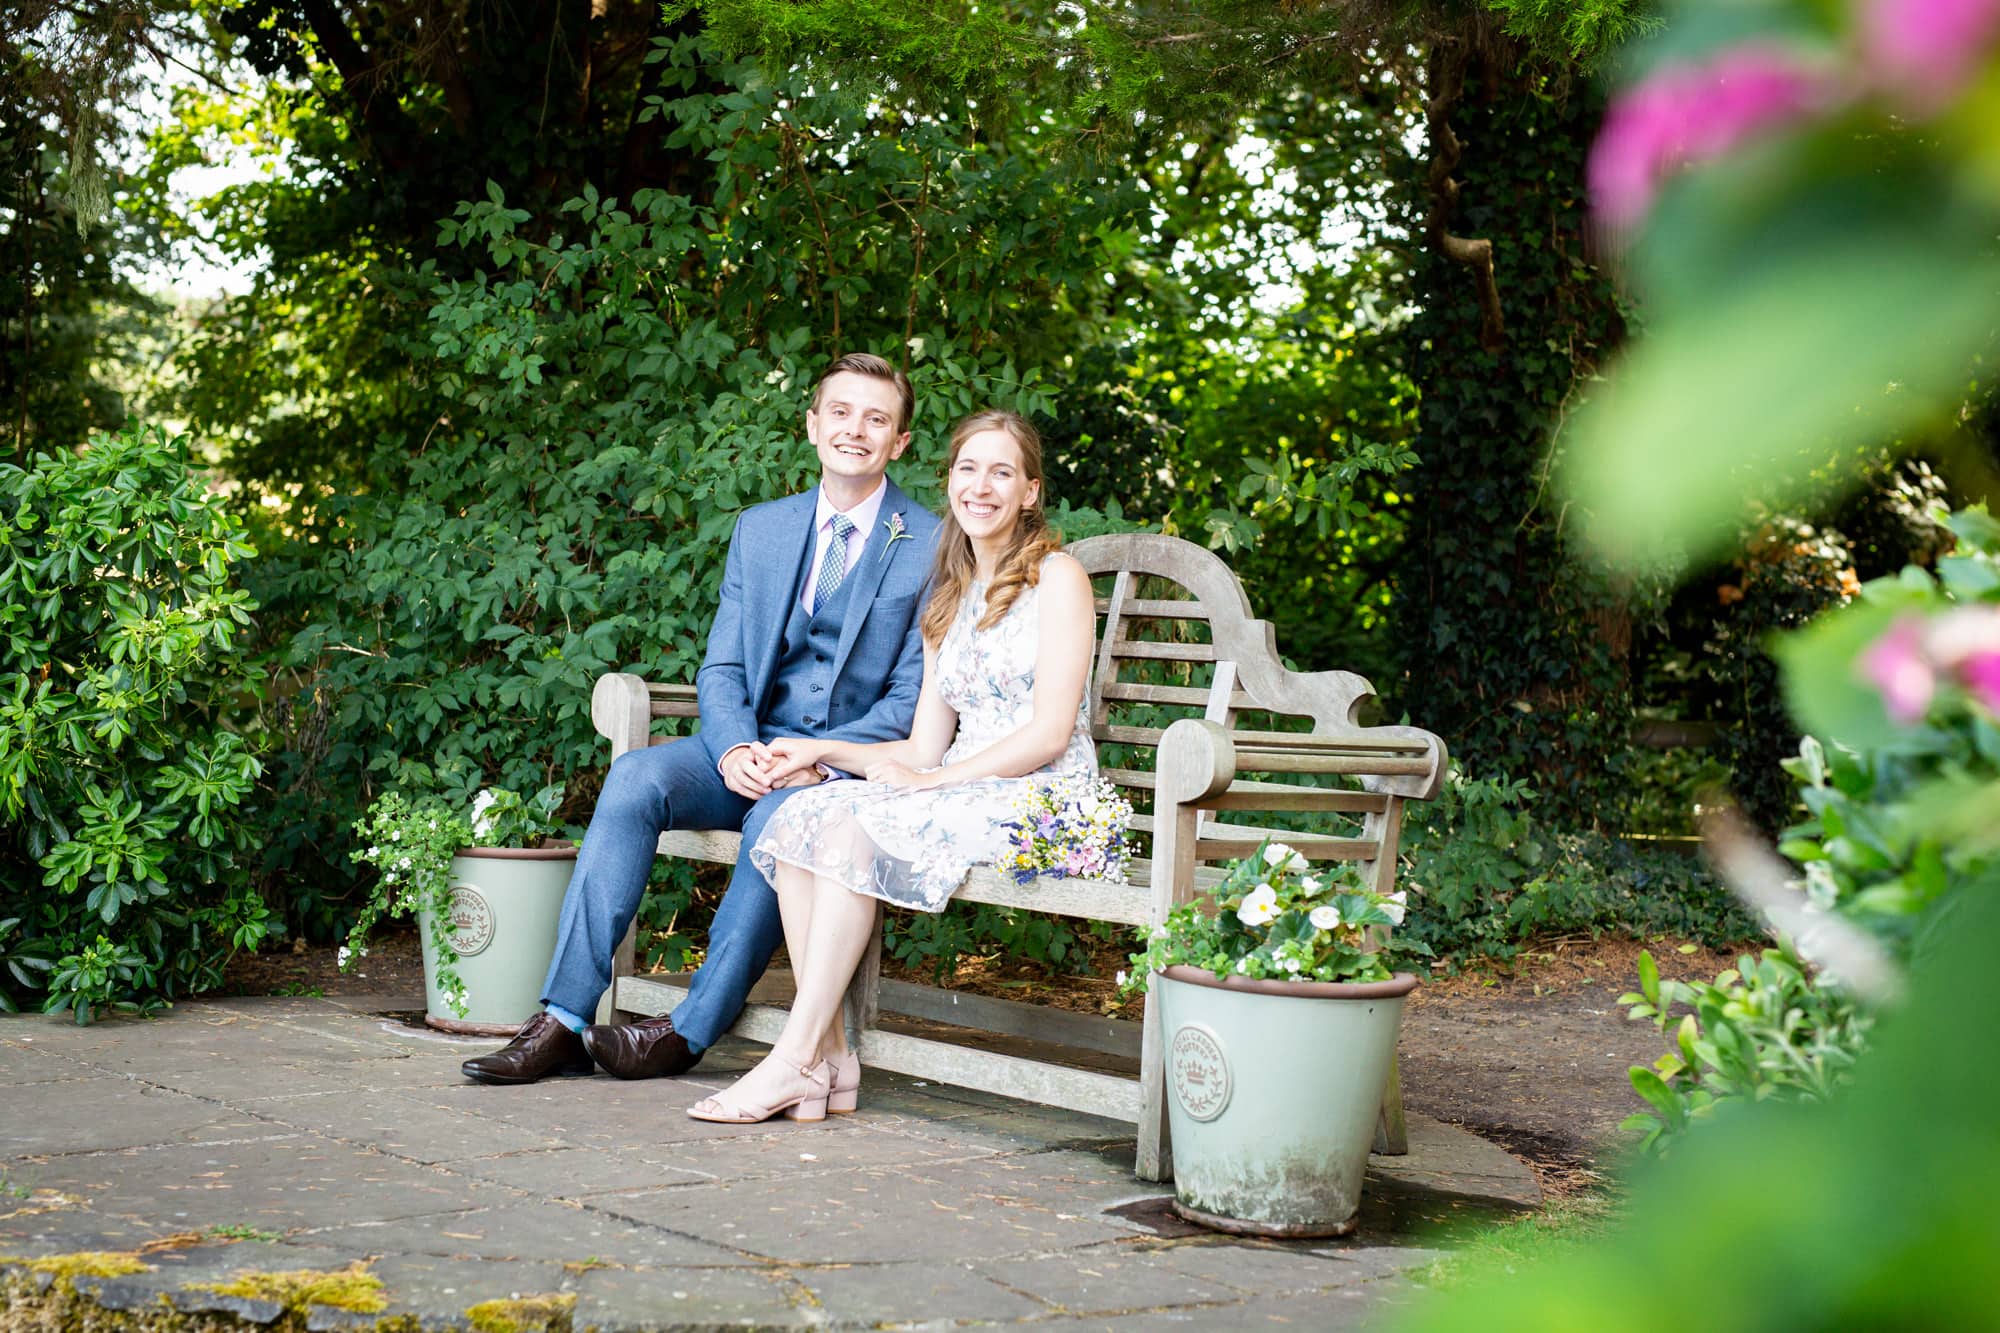 Smiling bride and groom sat on bench at Oaks Farm Weddings in Bromley wedding photoshoot